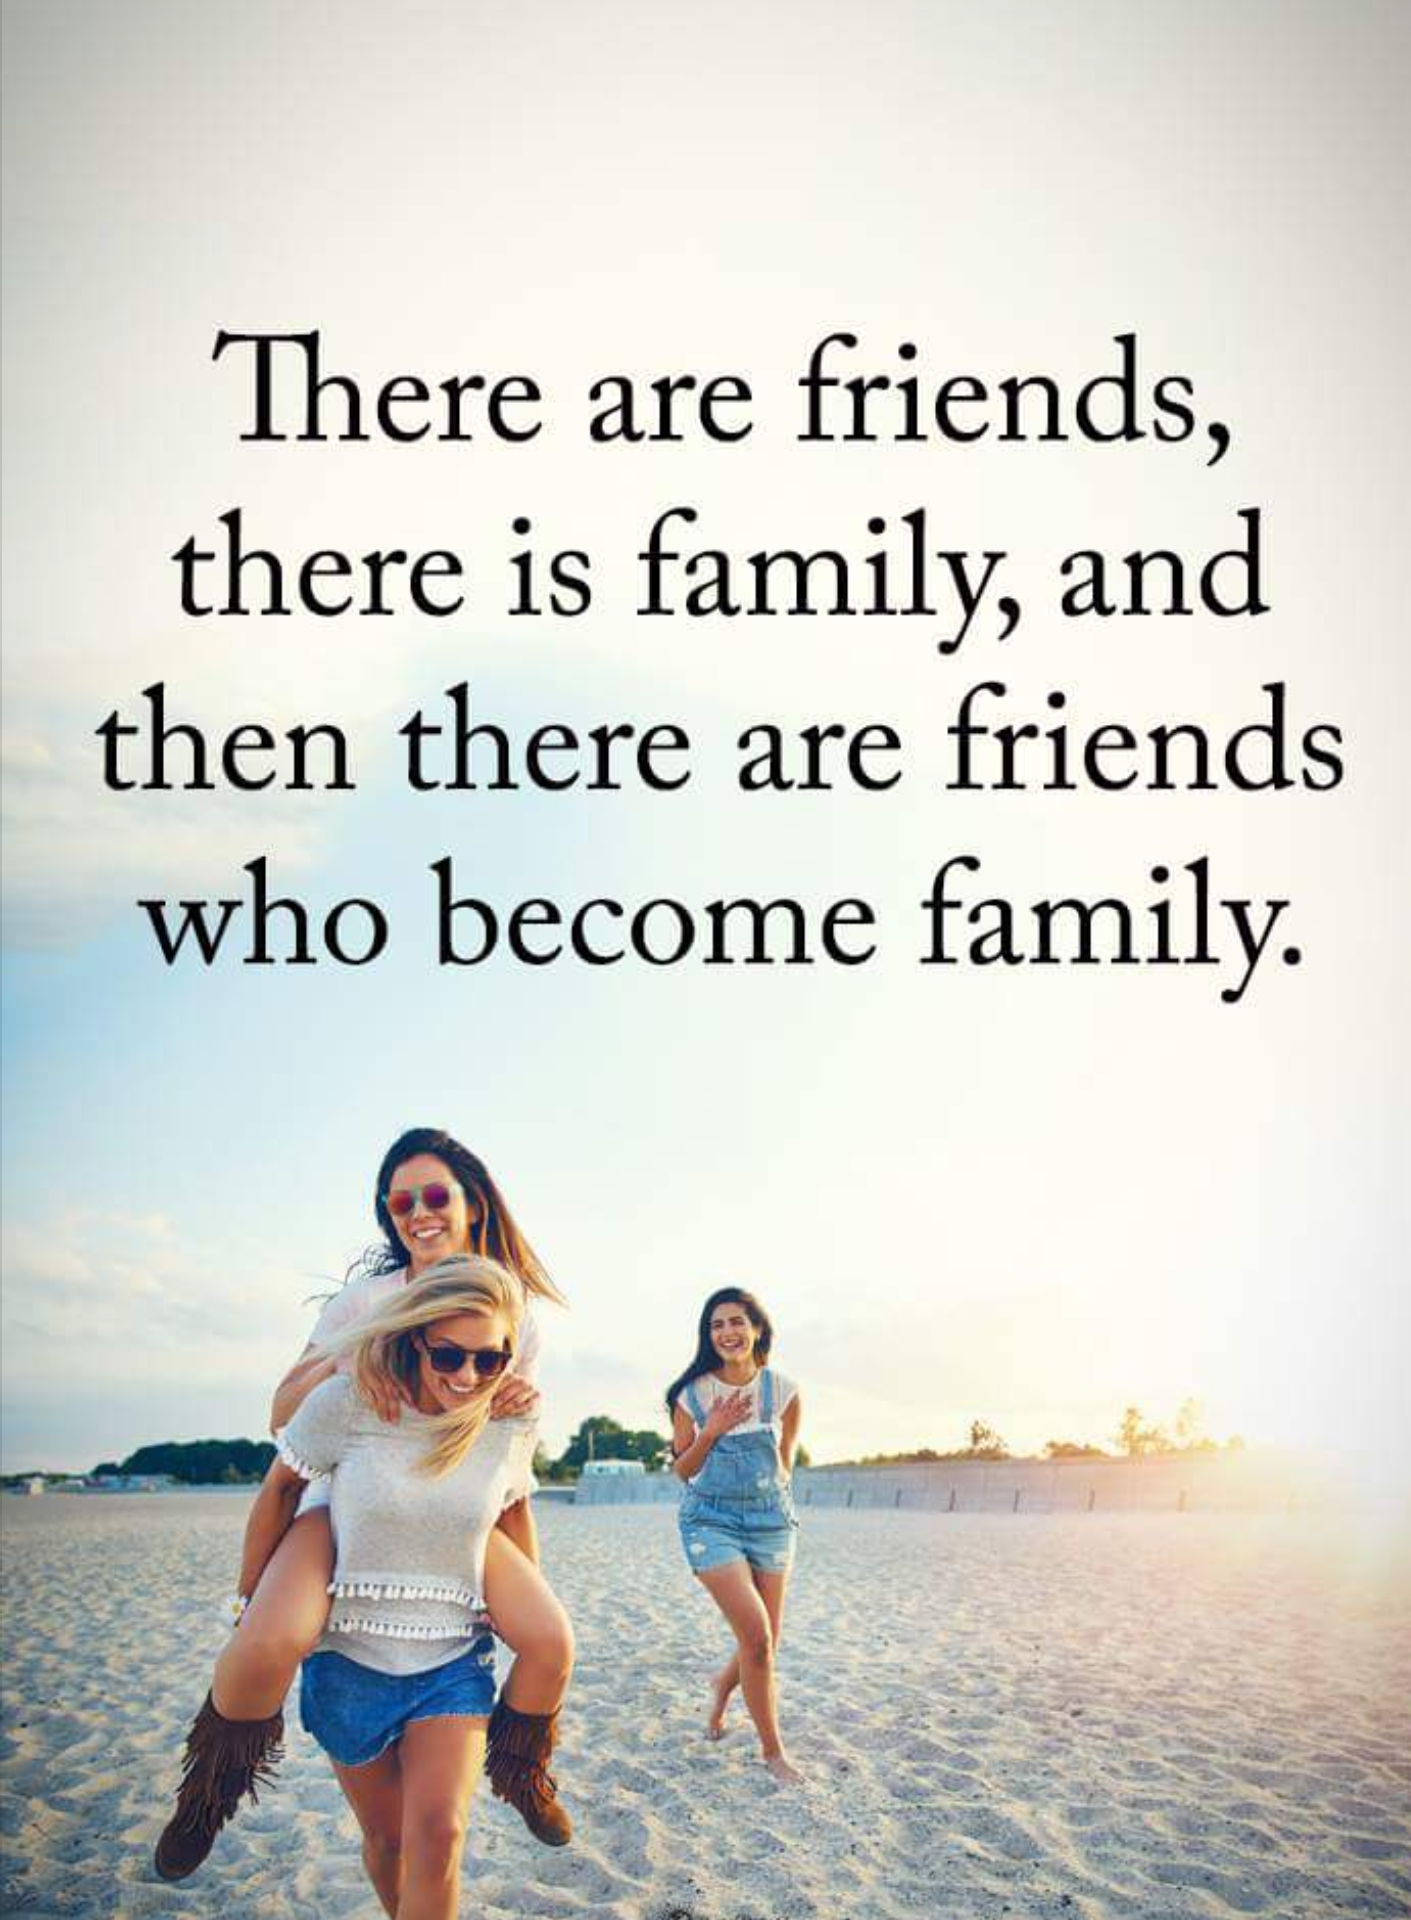 There are friends, there is family, and then there are friends that become family.